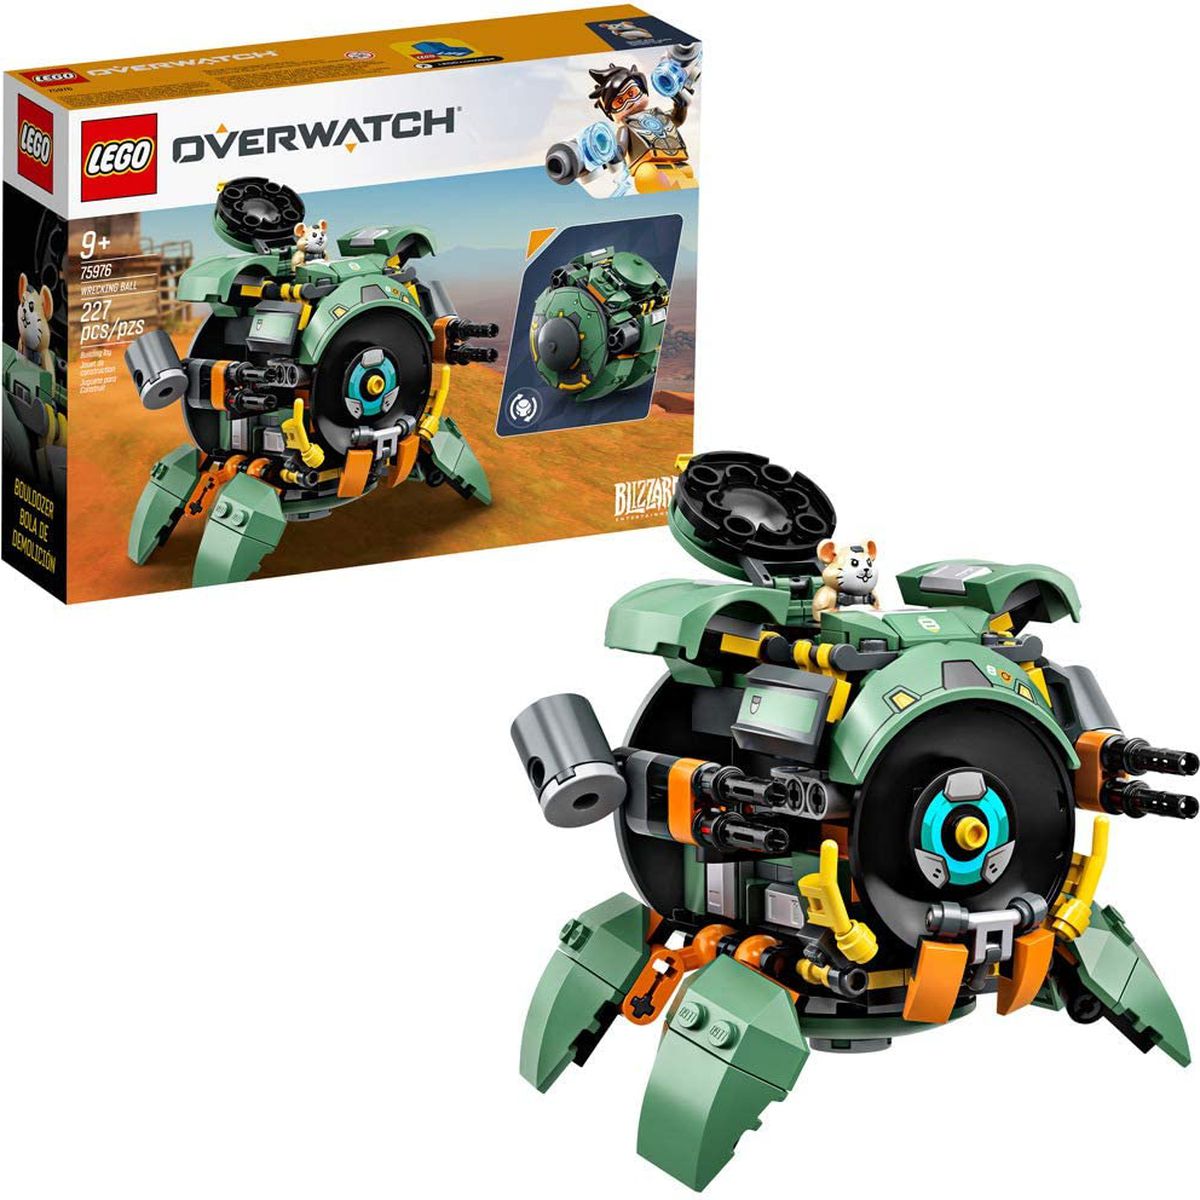 The box and finished set of the Overwatch Wrecking Ball Lego set